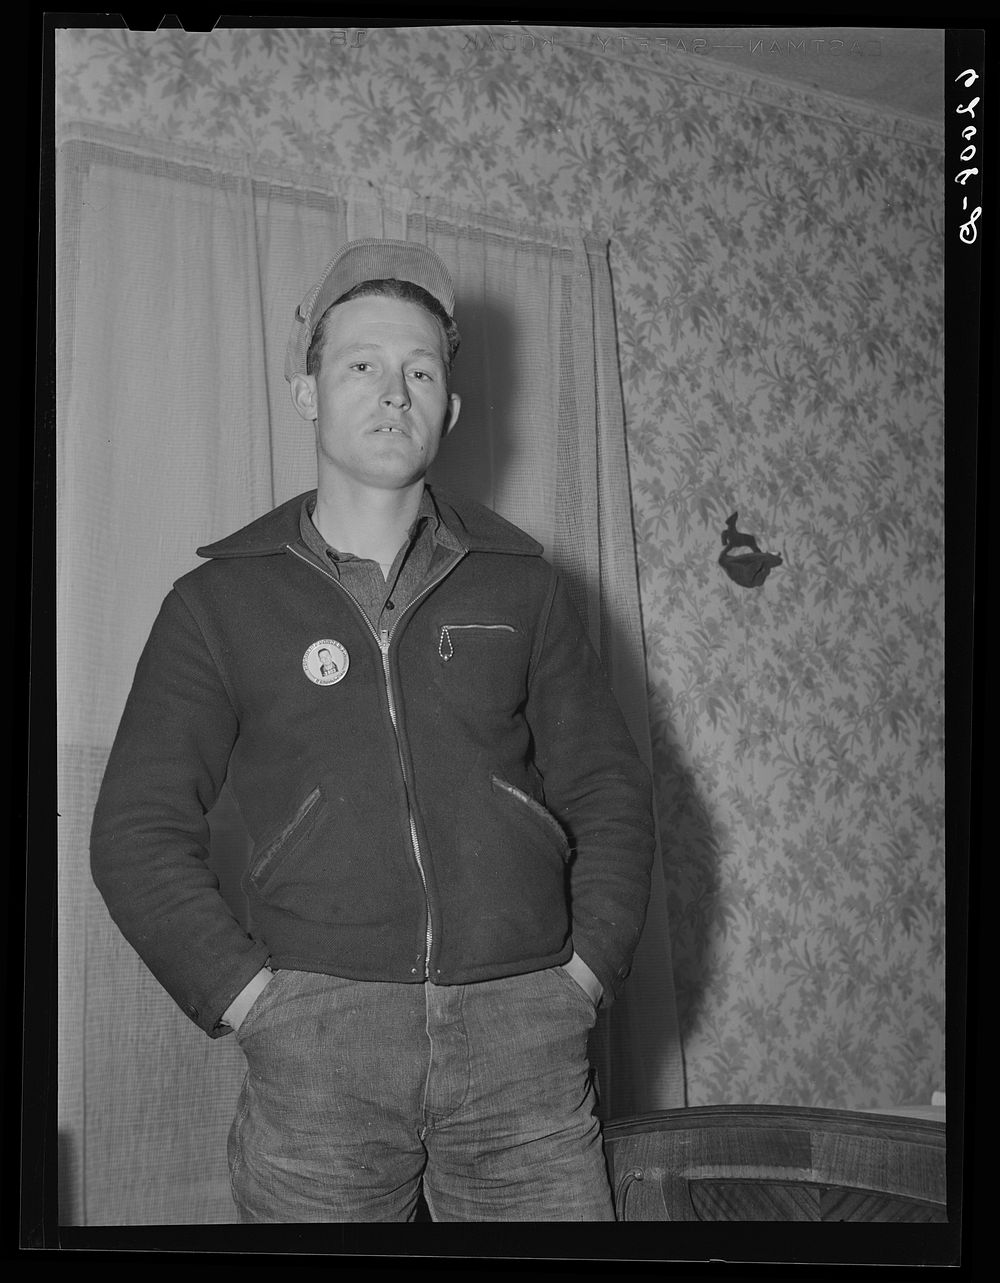 Paul McDaniel with his laborer's button. Each employee wears an identification. Sourced from the Library of Congress.